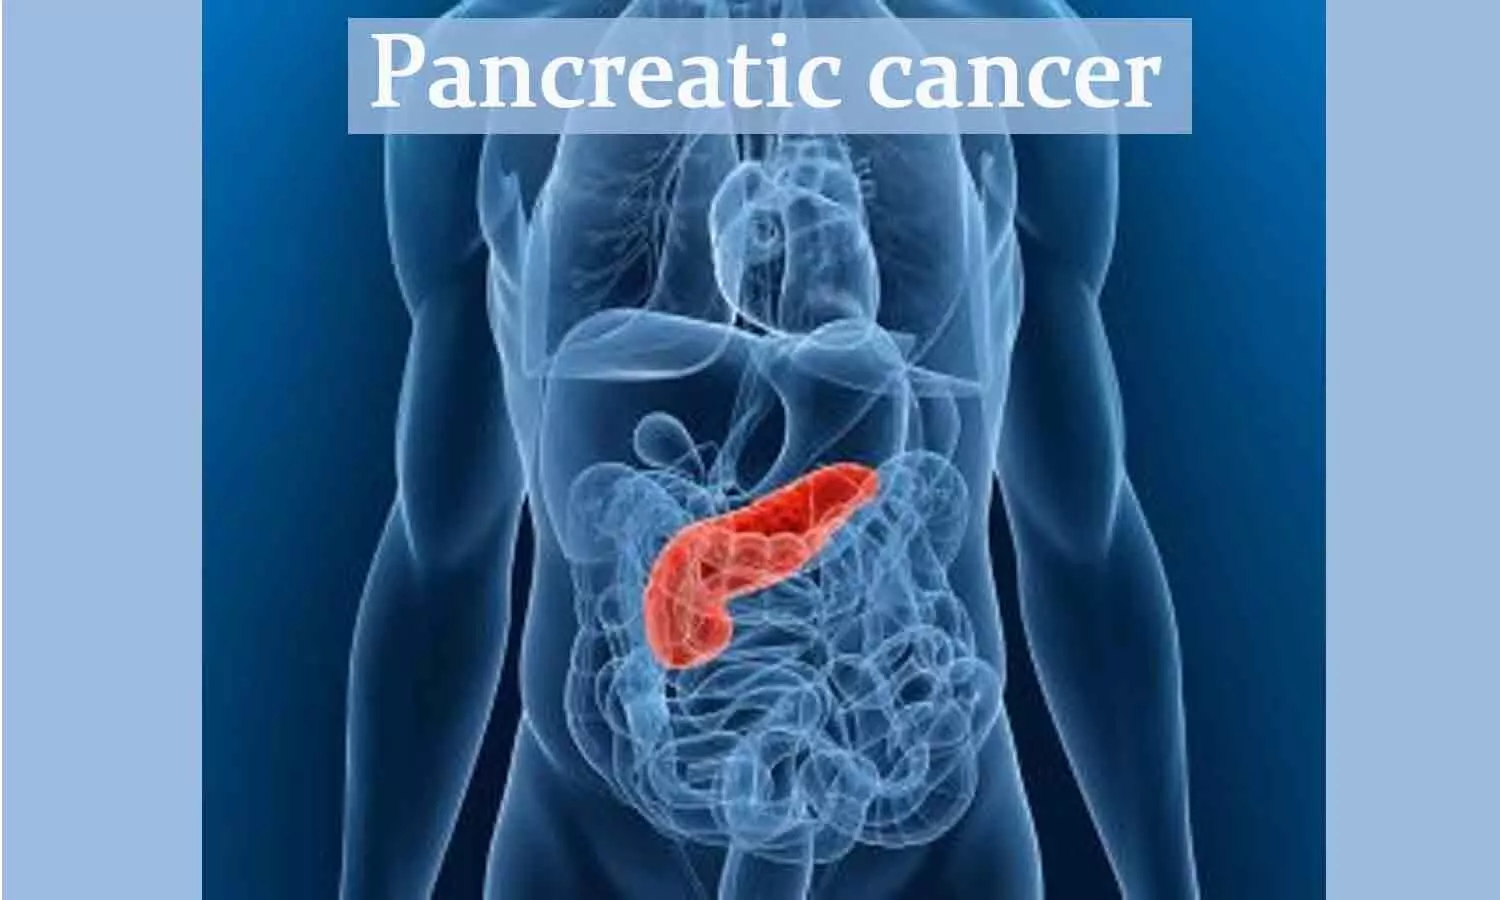 New drug may improve quality of   life and survival in pancreatic cancer